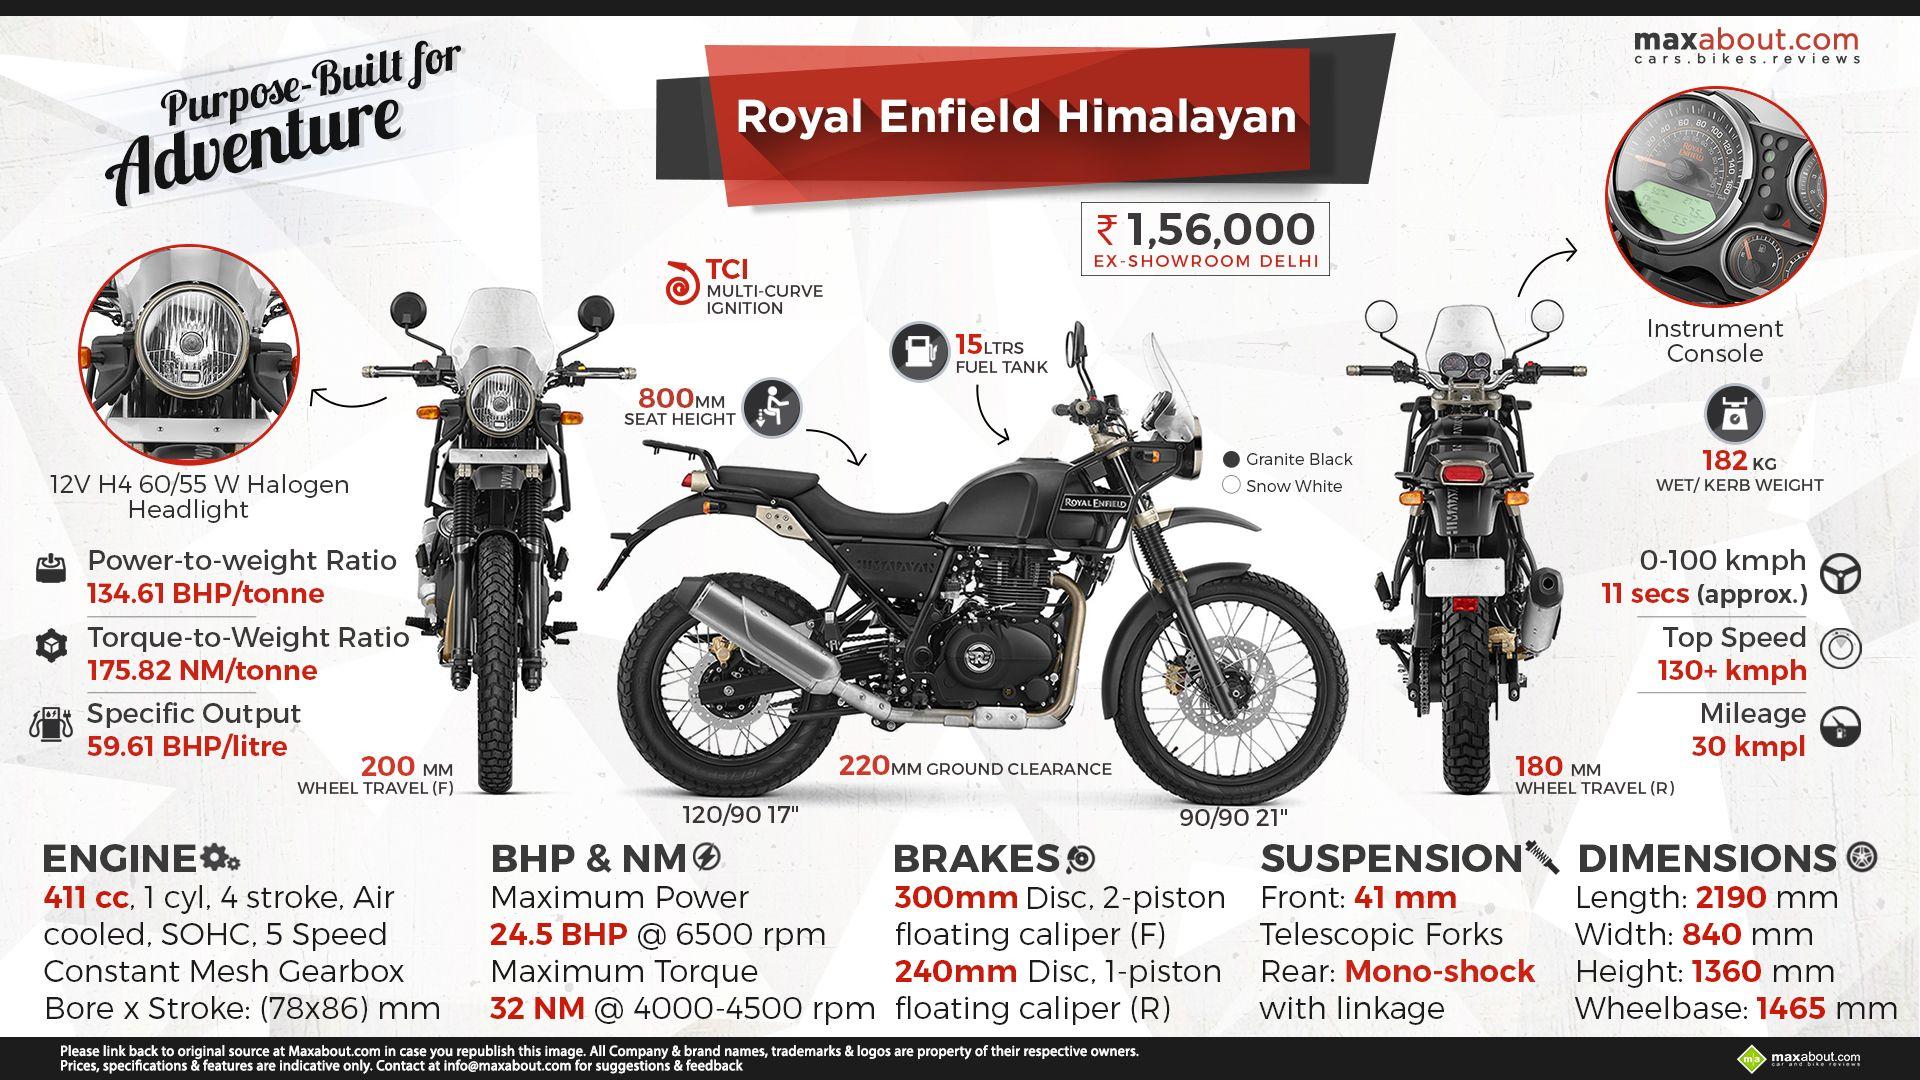 Royal Enfield Himalayan: Built For All Roads. Built For No Roads